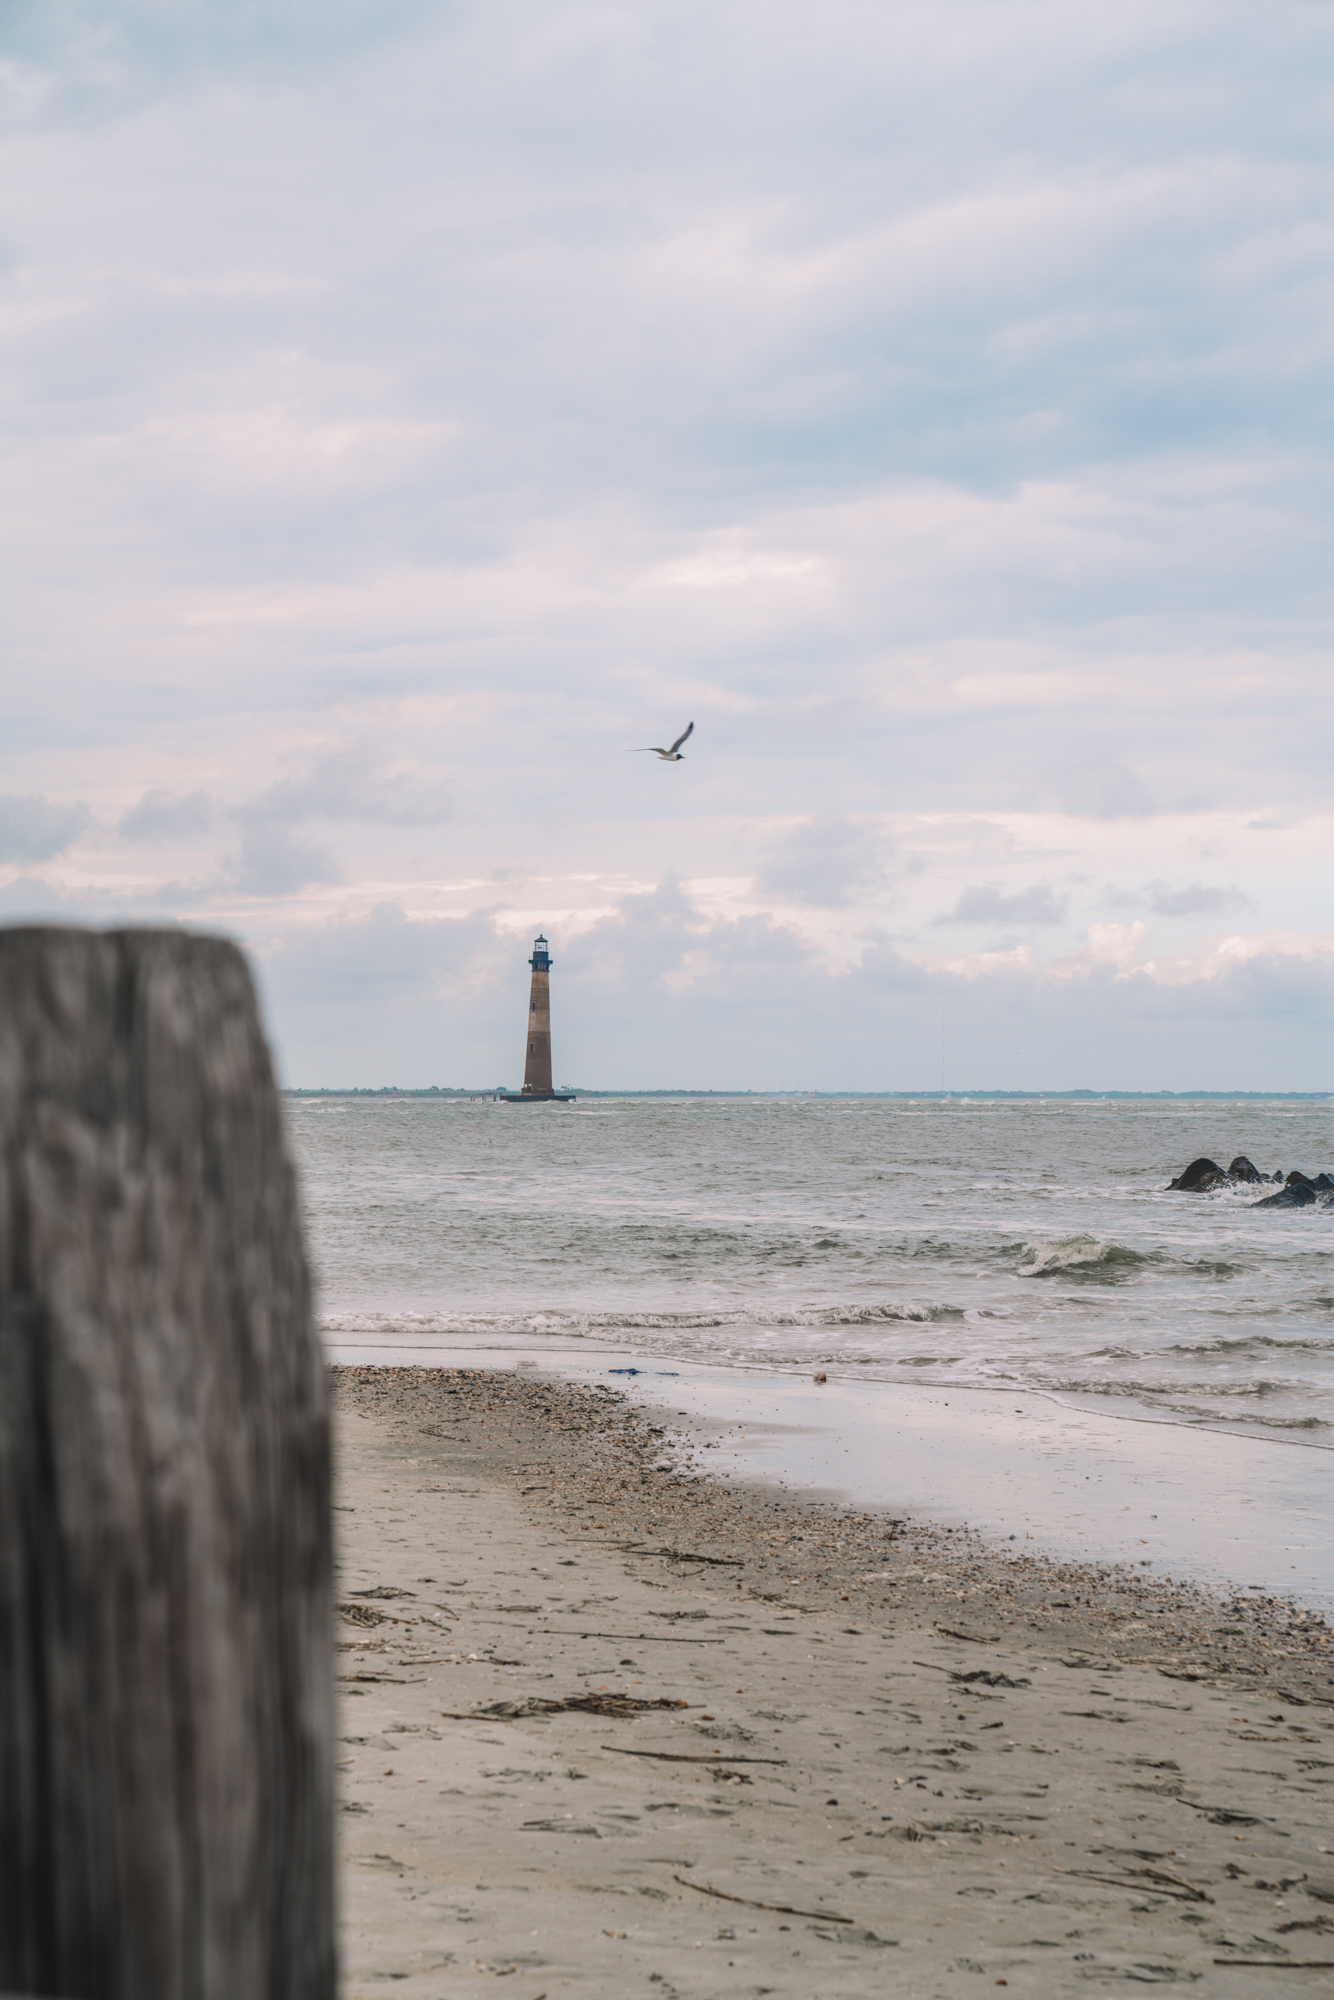 A red and white lighthouse stands far away with the beach in the foreground.